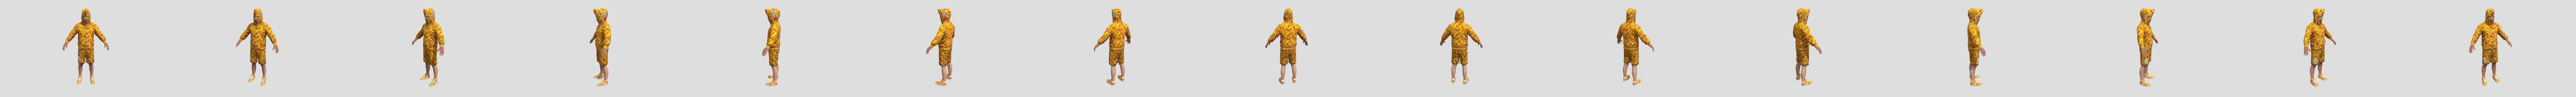 Pubg Character Outfit Download Free 3d Model By Instagram1m Lal 1m Lal 03dbcfb